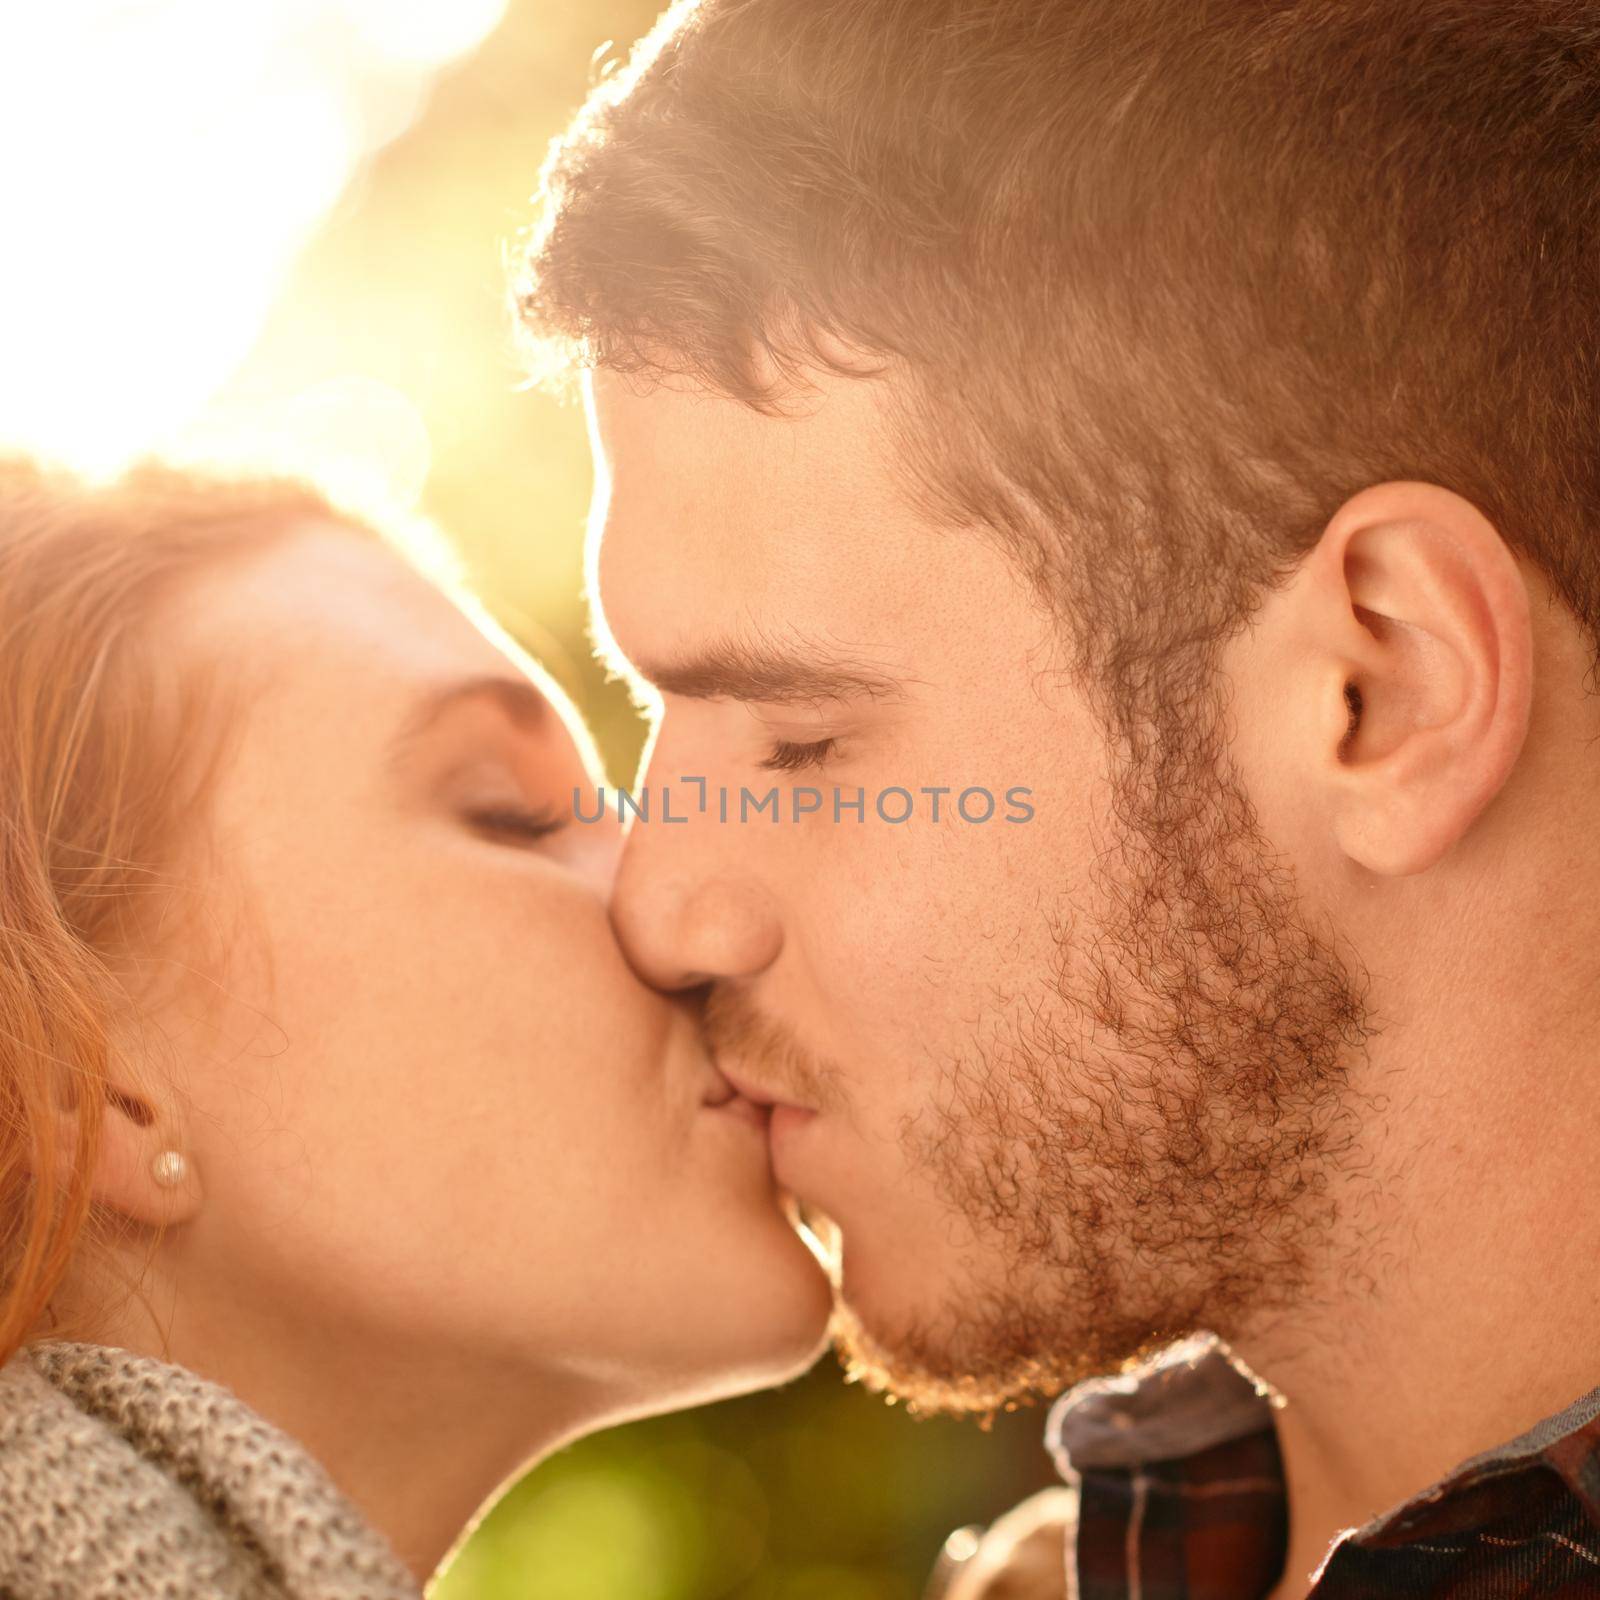 Every kiss feels like our first. a happy young couple sharing a kiss outdoors